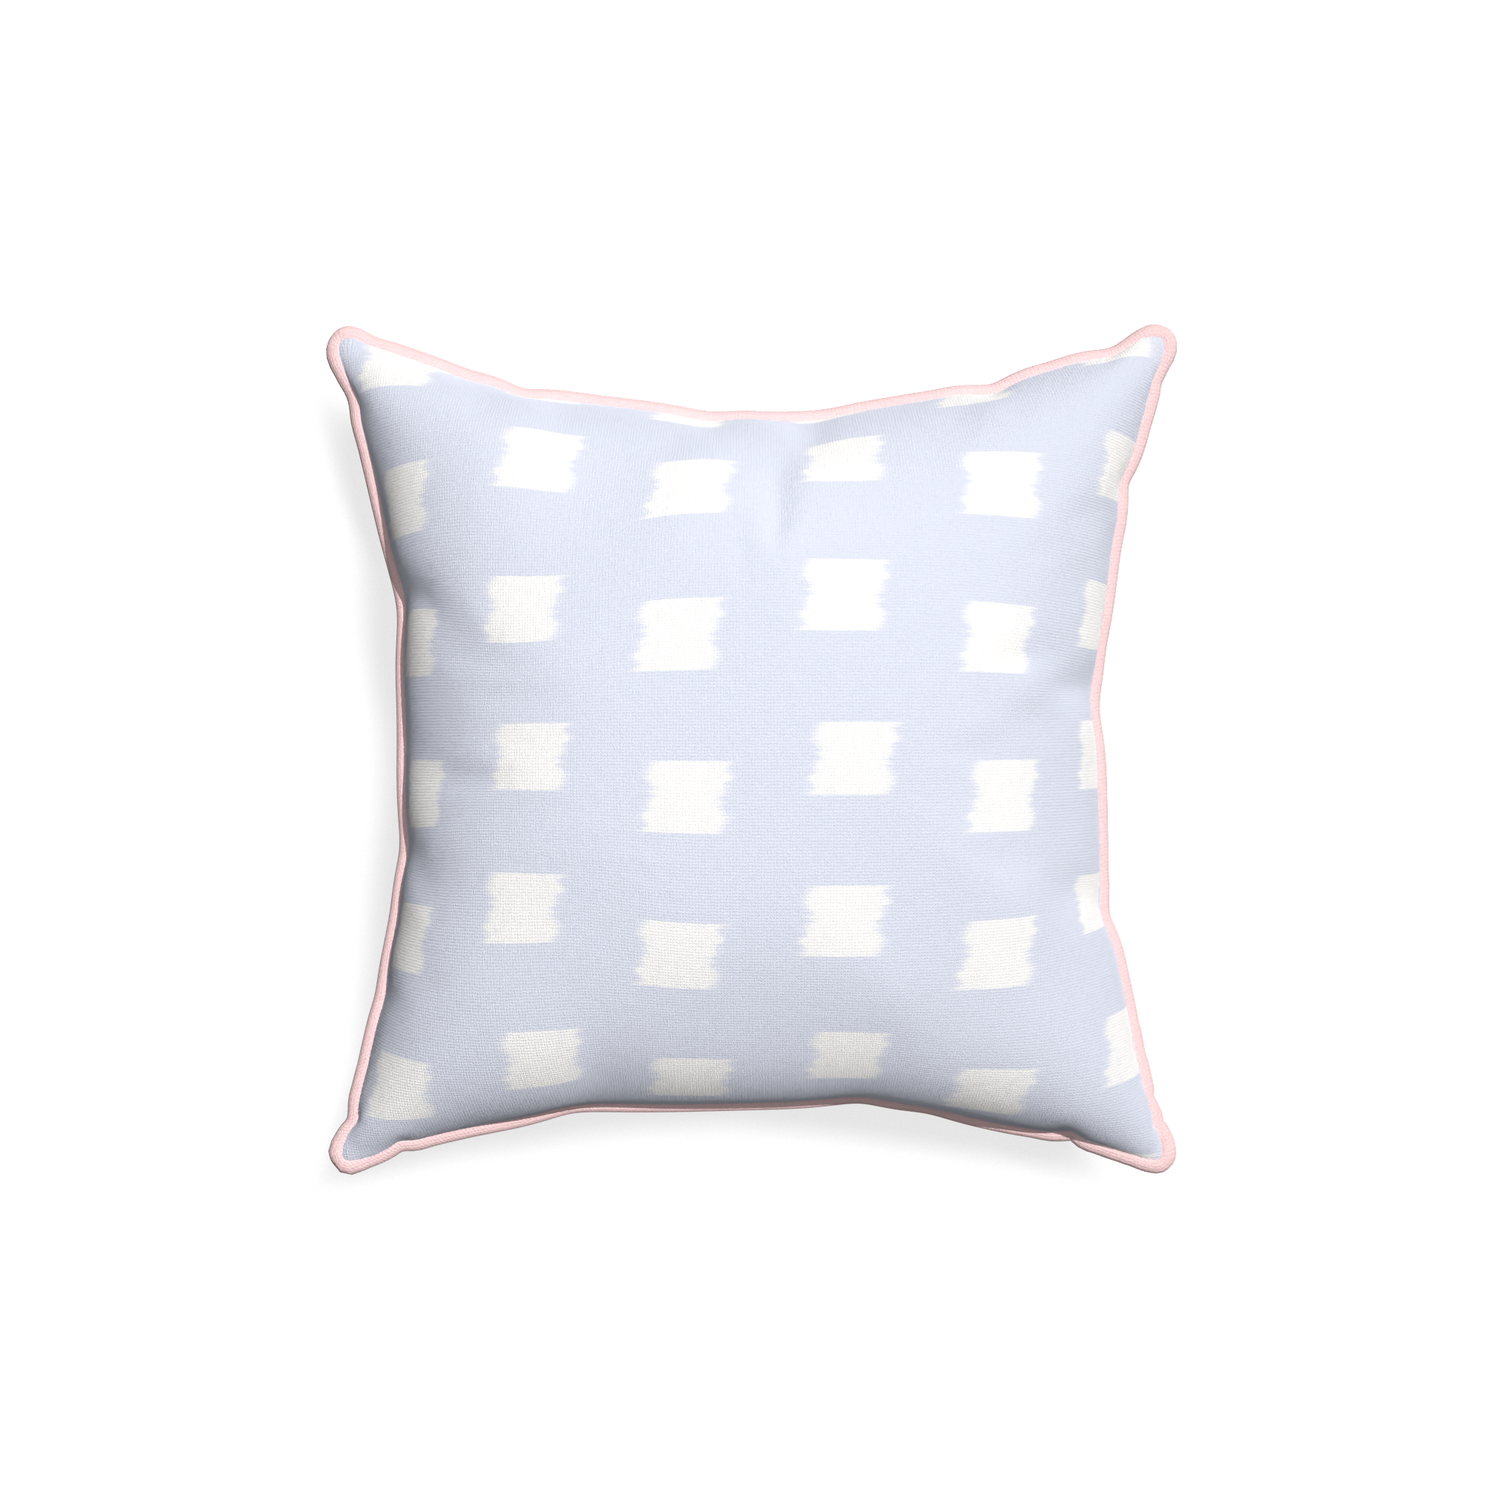 18-square denton custom sky blue patternpillow with petal piping on white background